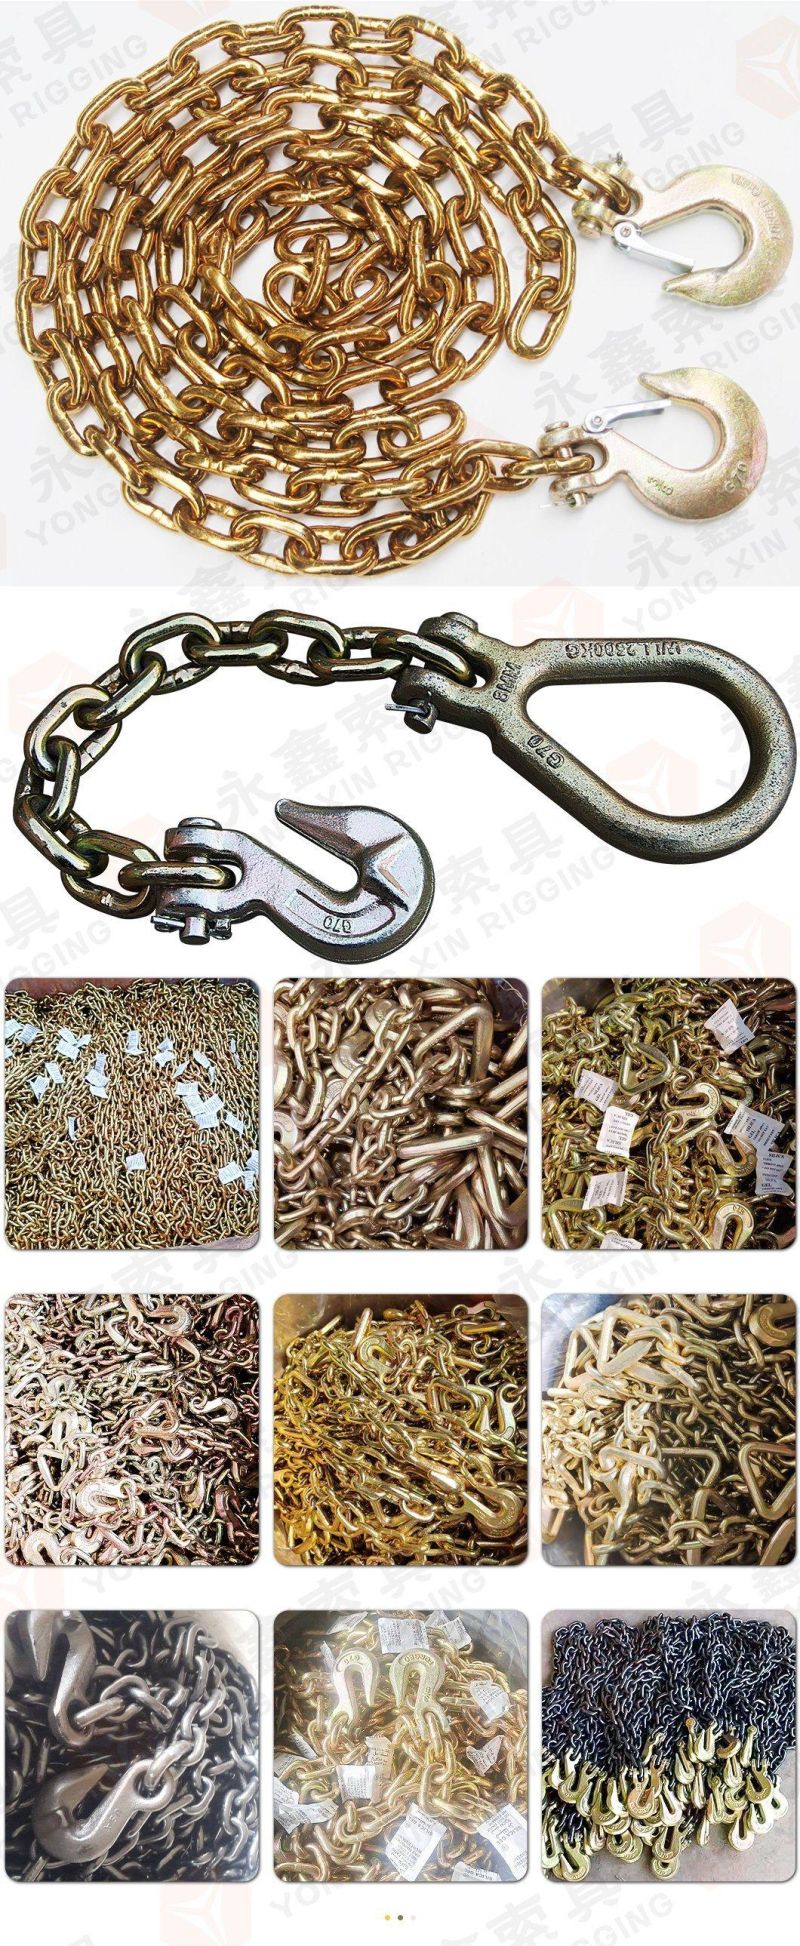 High Quality High Strength Heavy Duty G70 Yellow Zinc Plated Tow Chains Drag Manufacture Chains